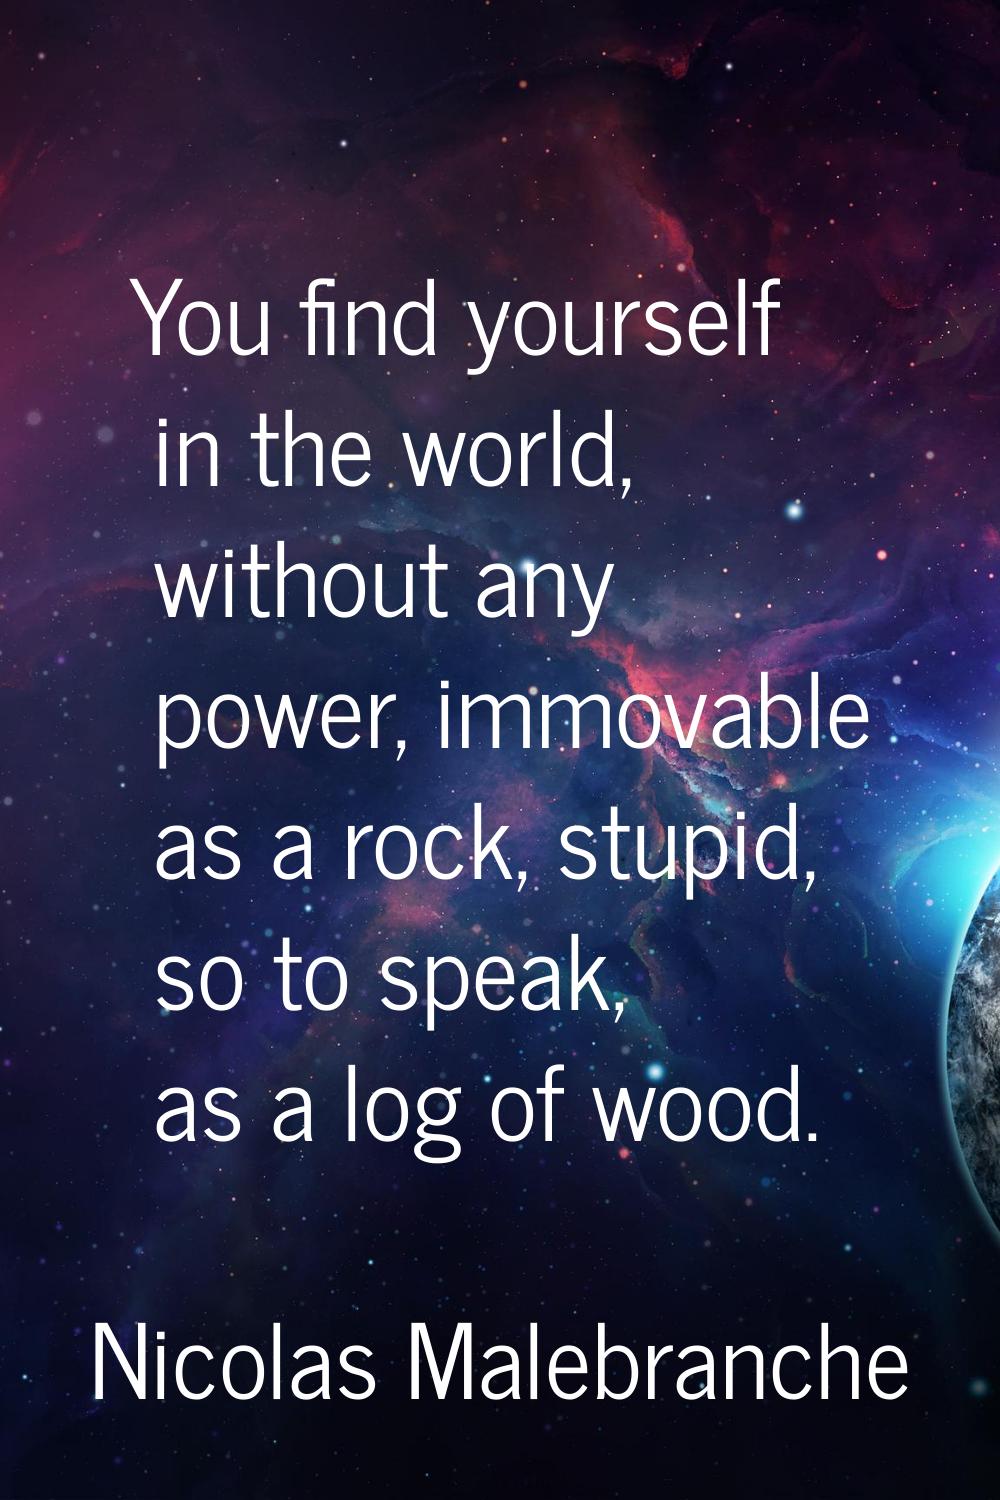 You find yourself in the world, without any power, immovable as a rock, stupid, so to speak, as a l